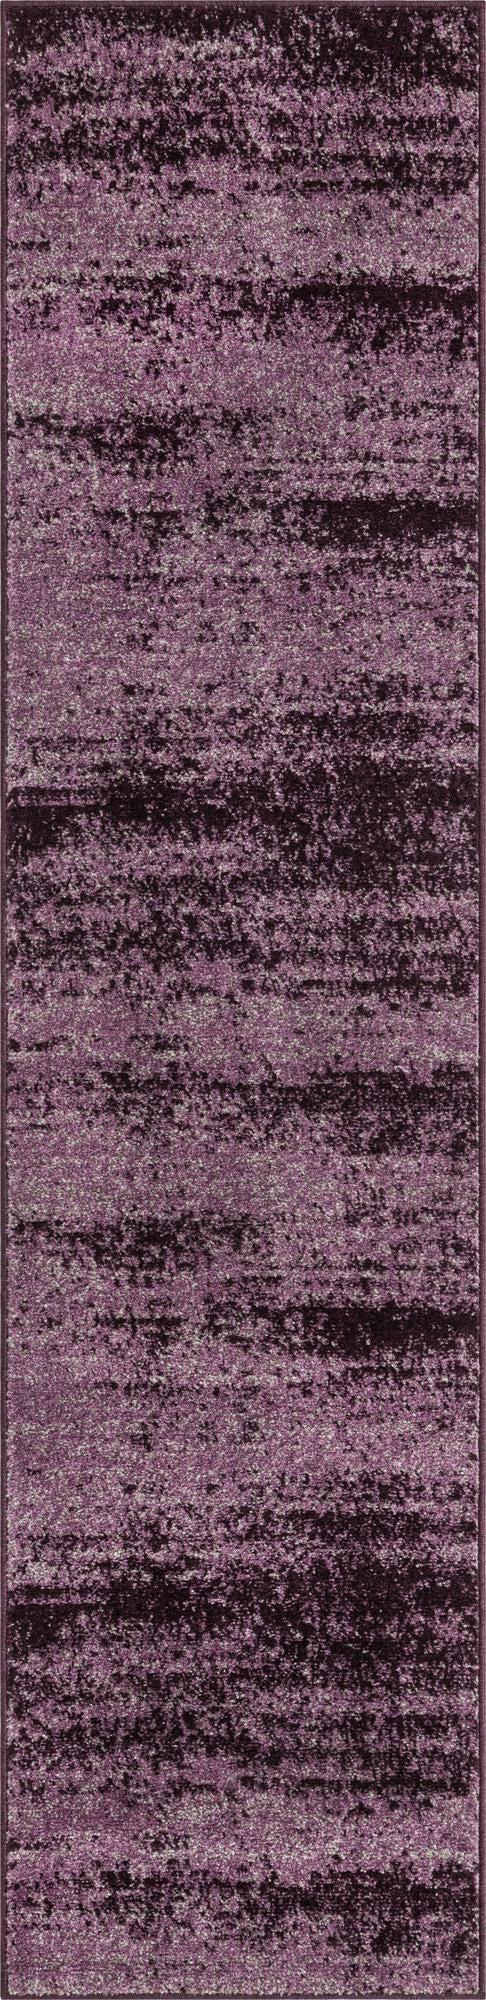 rugpal desdemona solid/striped area rug collection